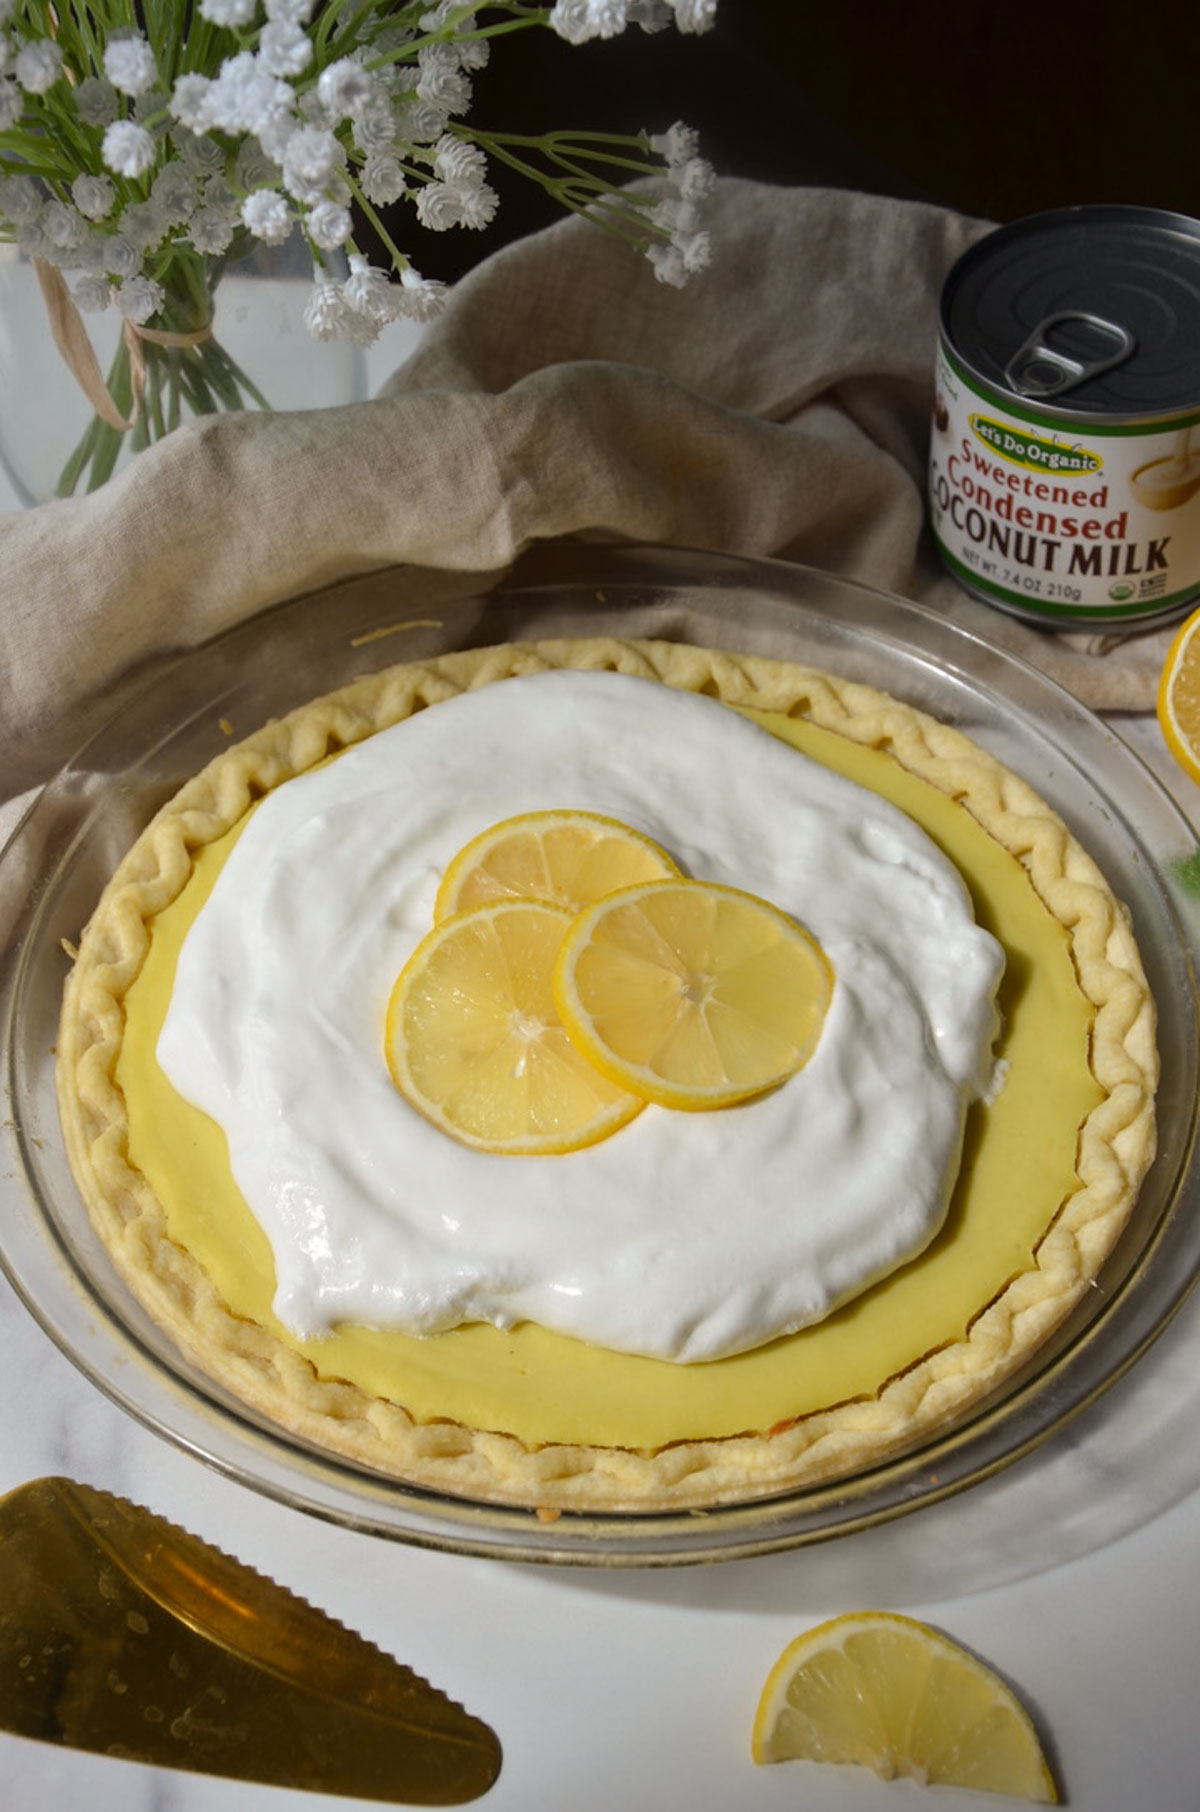 A whole vegan lemon pie on the table topped with whipped cream and lemon slices.